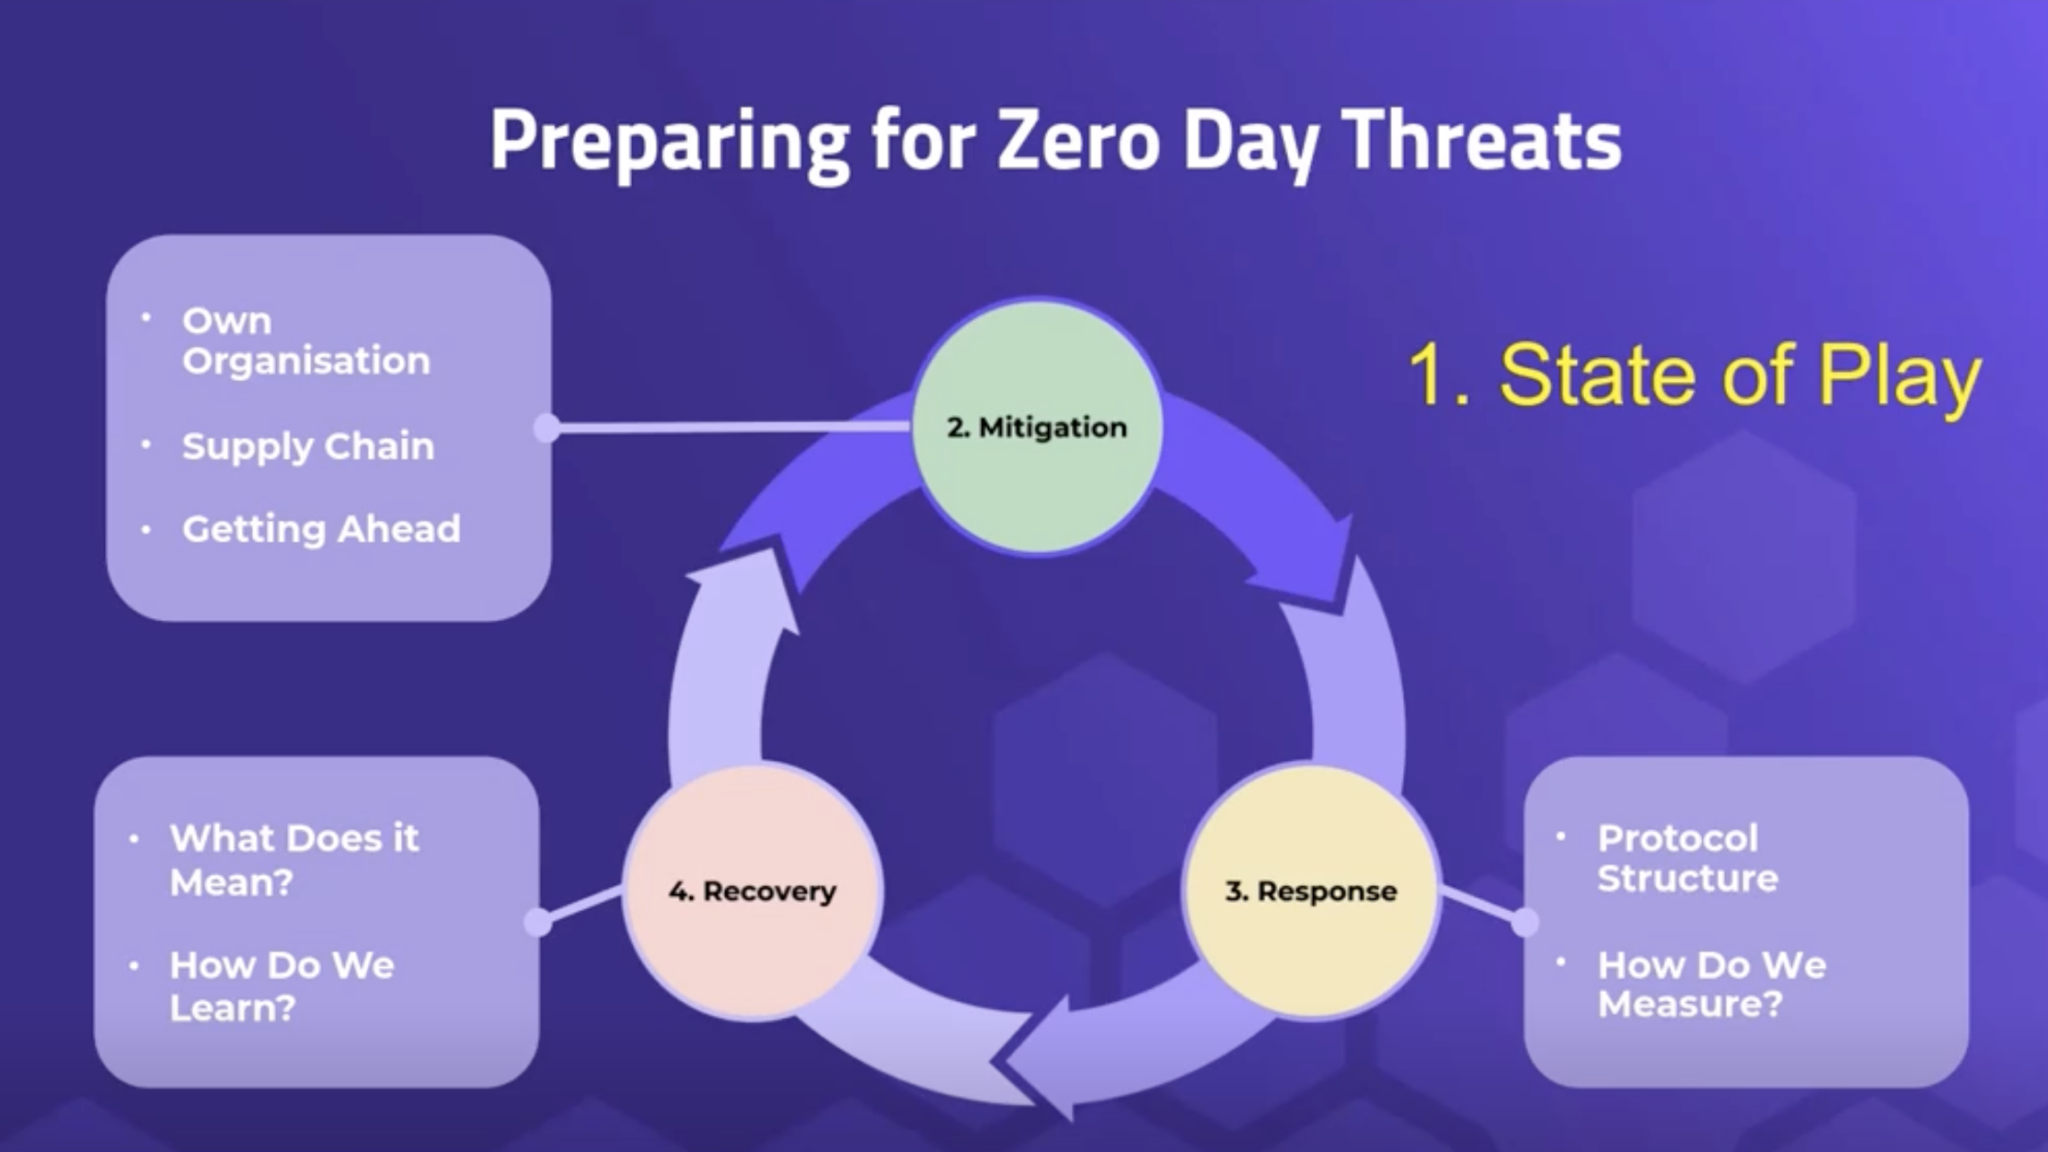 4 stages in preparing for zero-day threats and responding to them: state of play, mitigation, response, and recovery.